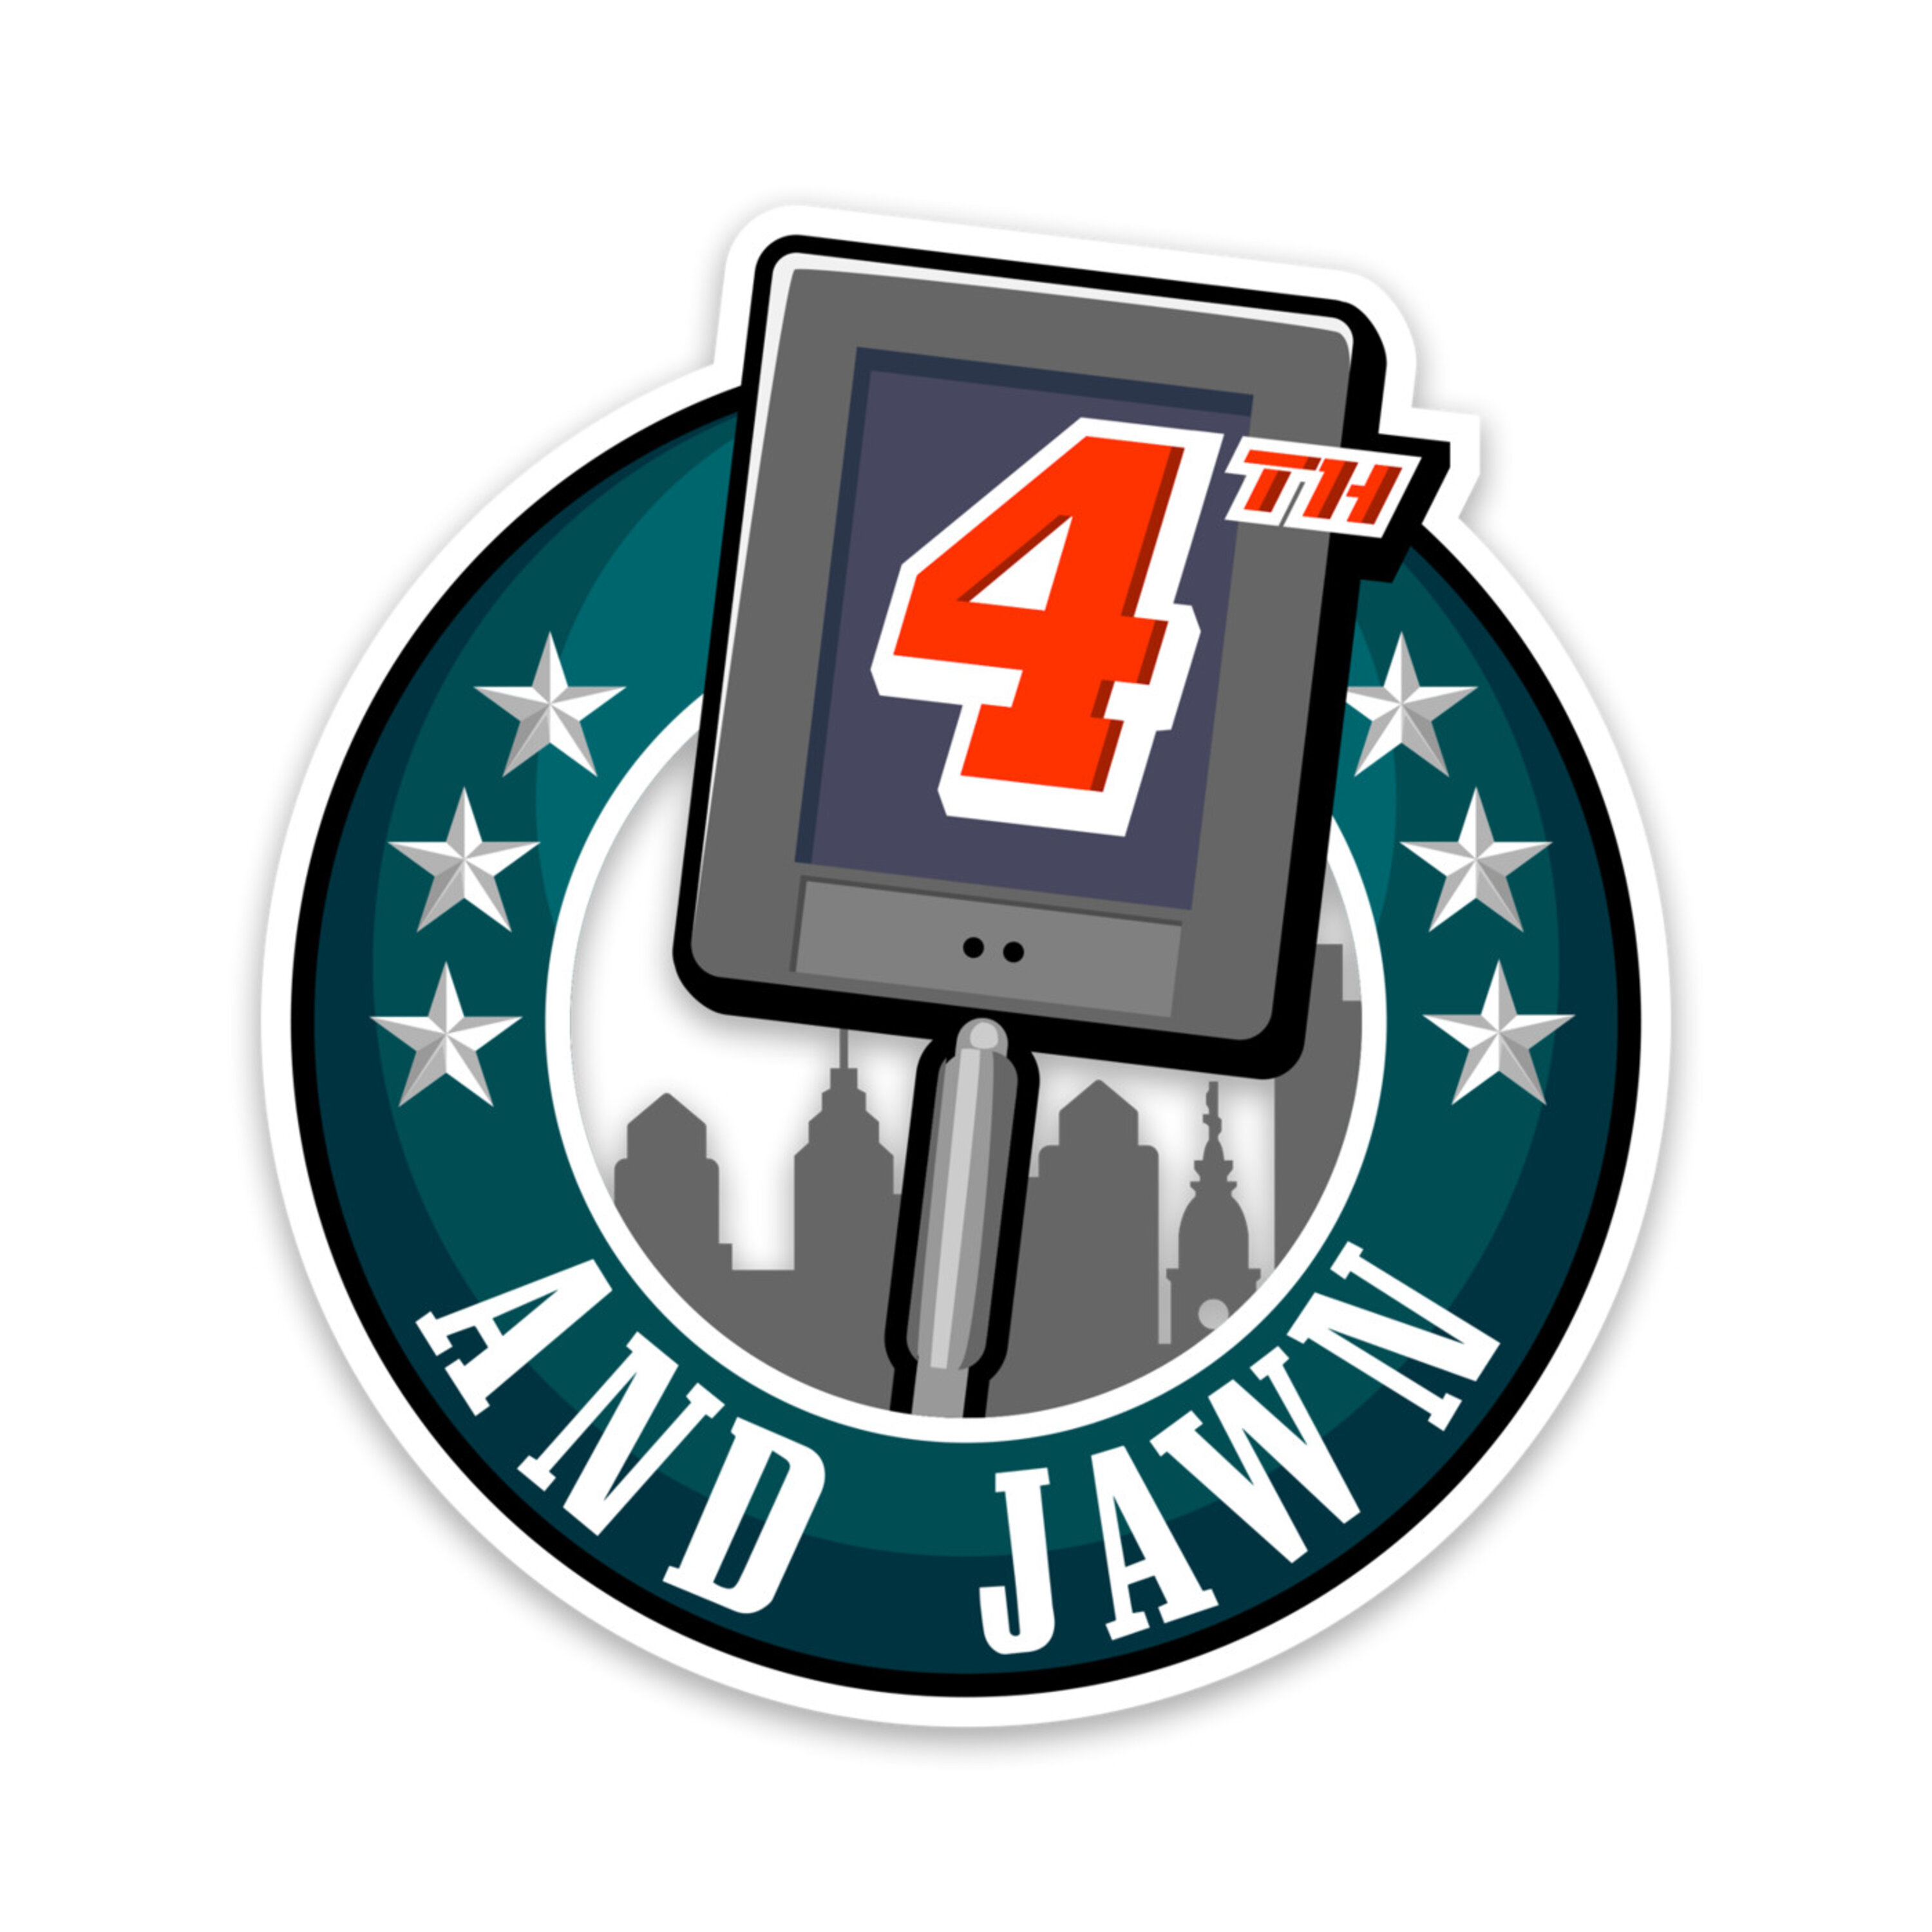 4th and Jawn - Episode 273 - WE'RE BANGING THE TABLE!